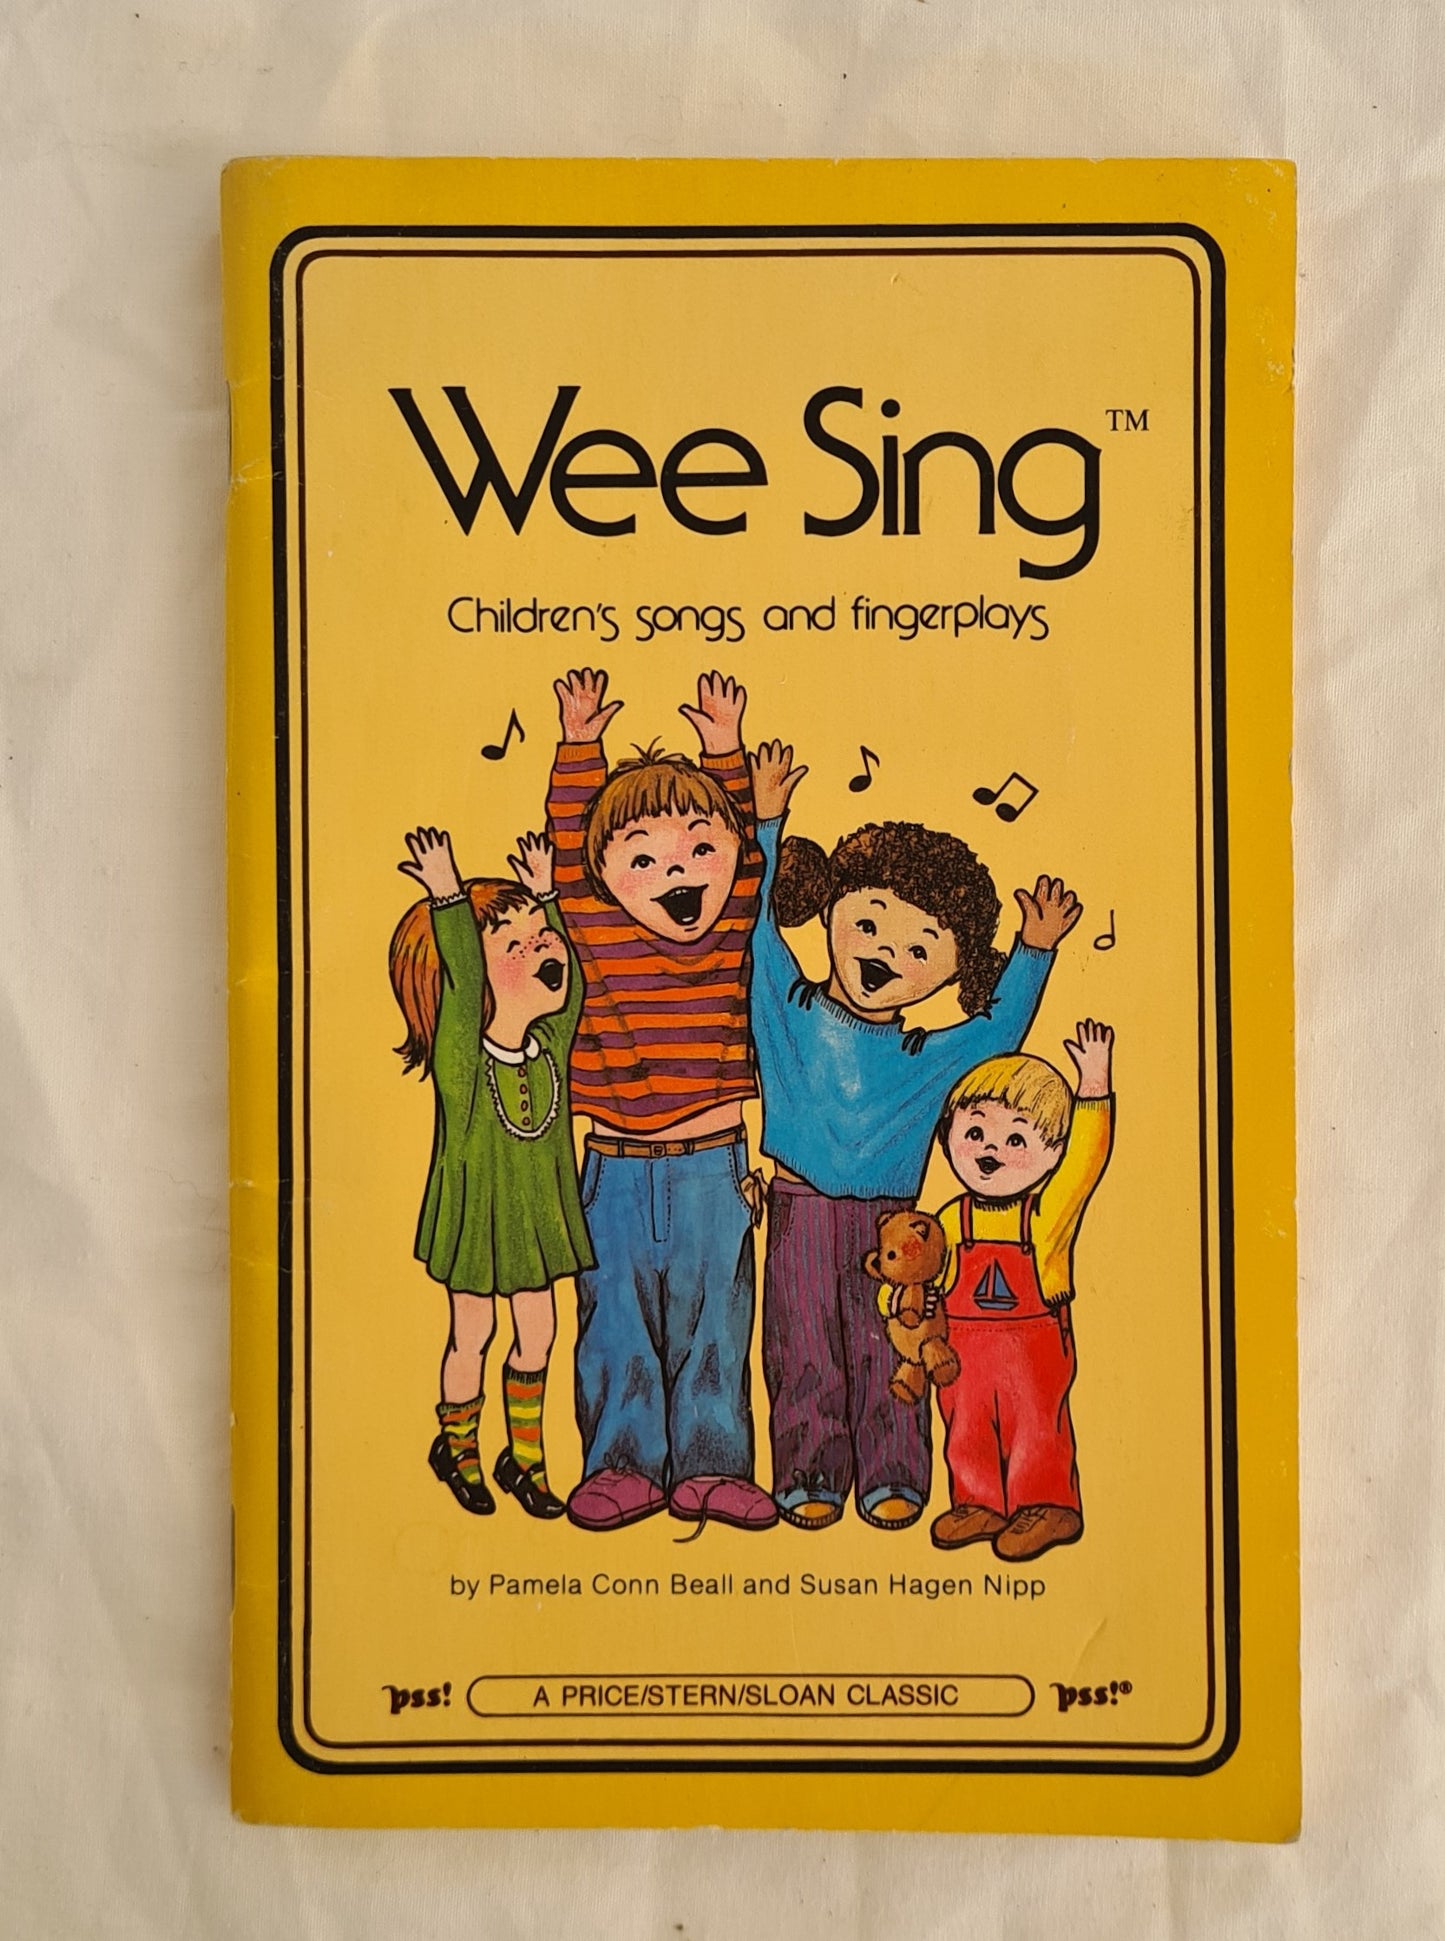 Wee Sing  Children’s Songs and Fingerplays  by Pamela Conn Beall and Susan Hagen Nipp  illustrated by Nancy Klein